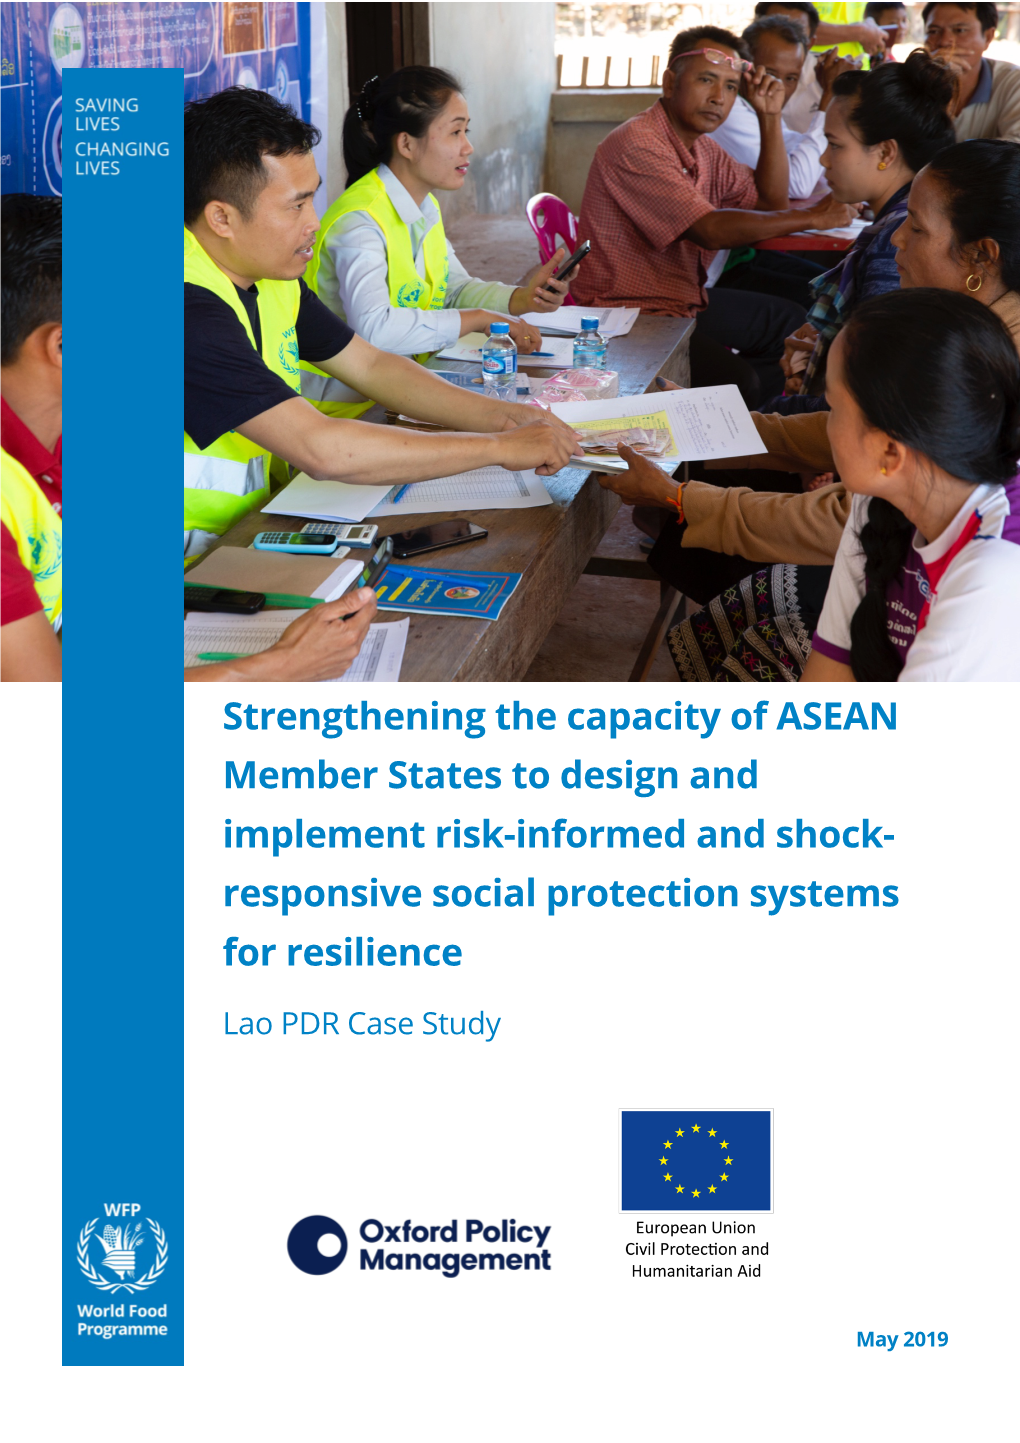 Strengthening the Capacity of ASEAN Member States to Design and Implement Risk-Informed and Shock- Responsive Social Protection Systems for Resilience